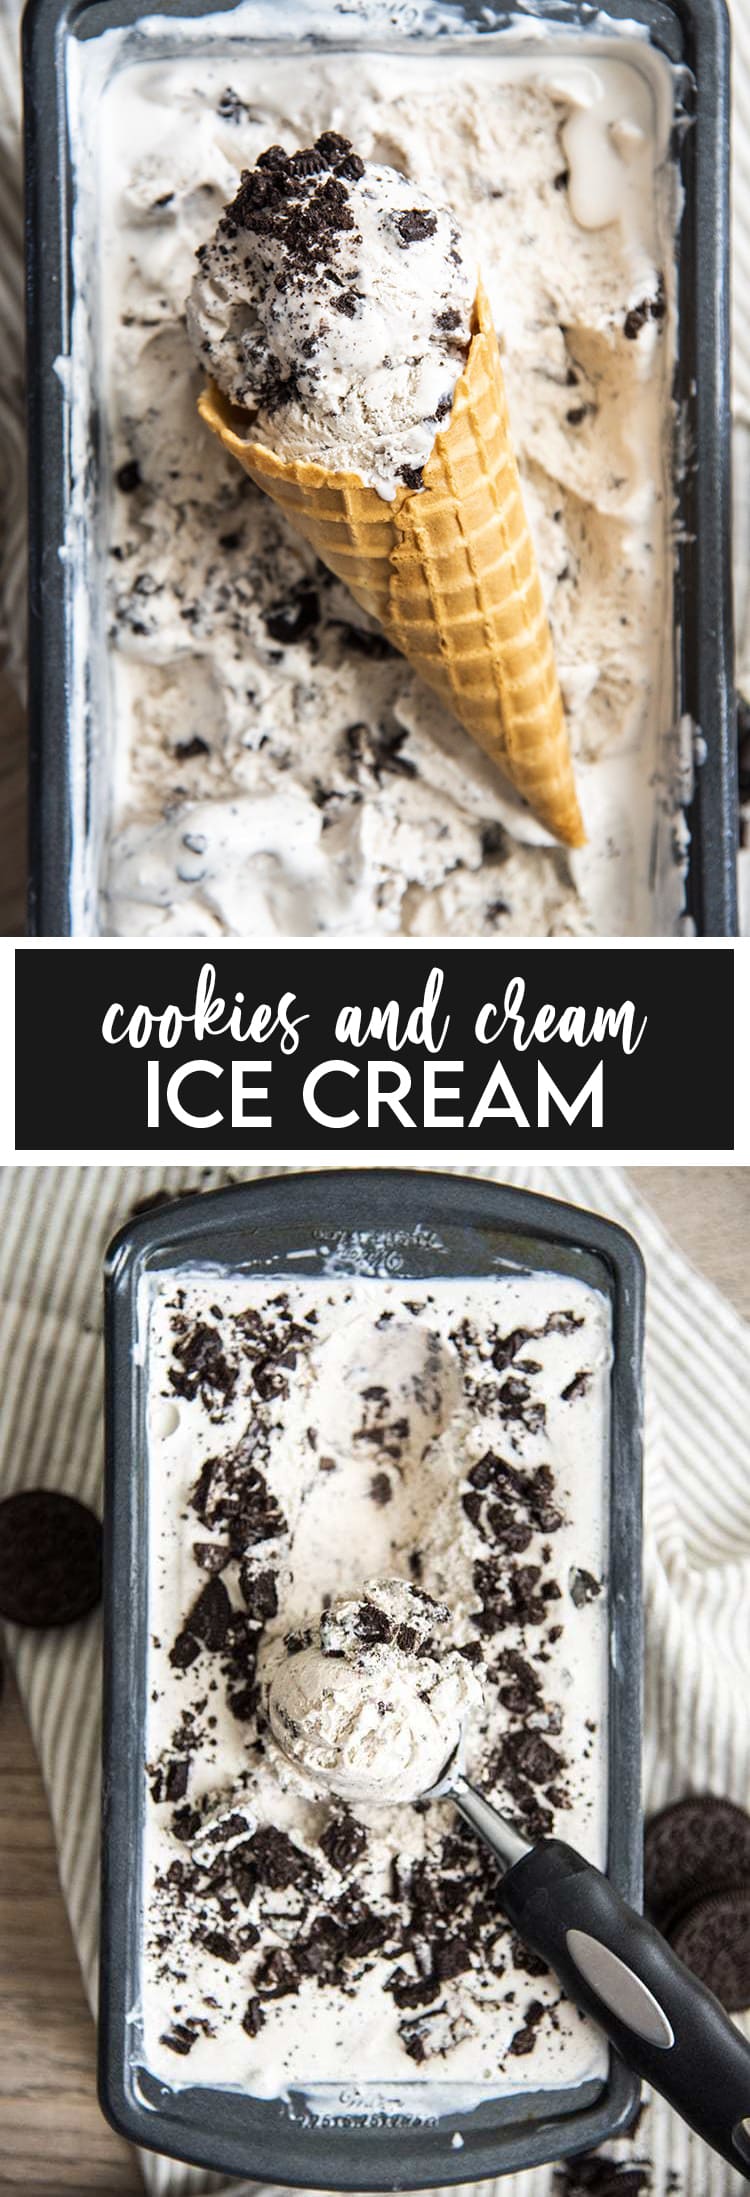 A collage of two photos of cookies and cream ice cream with text overlay title with recipe title.